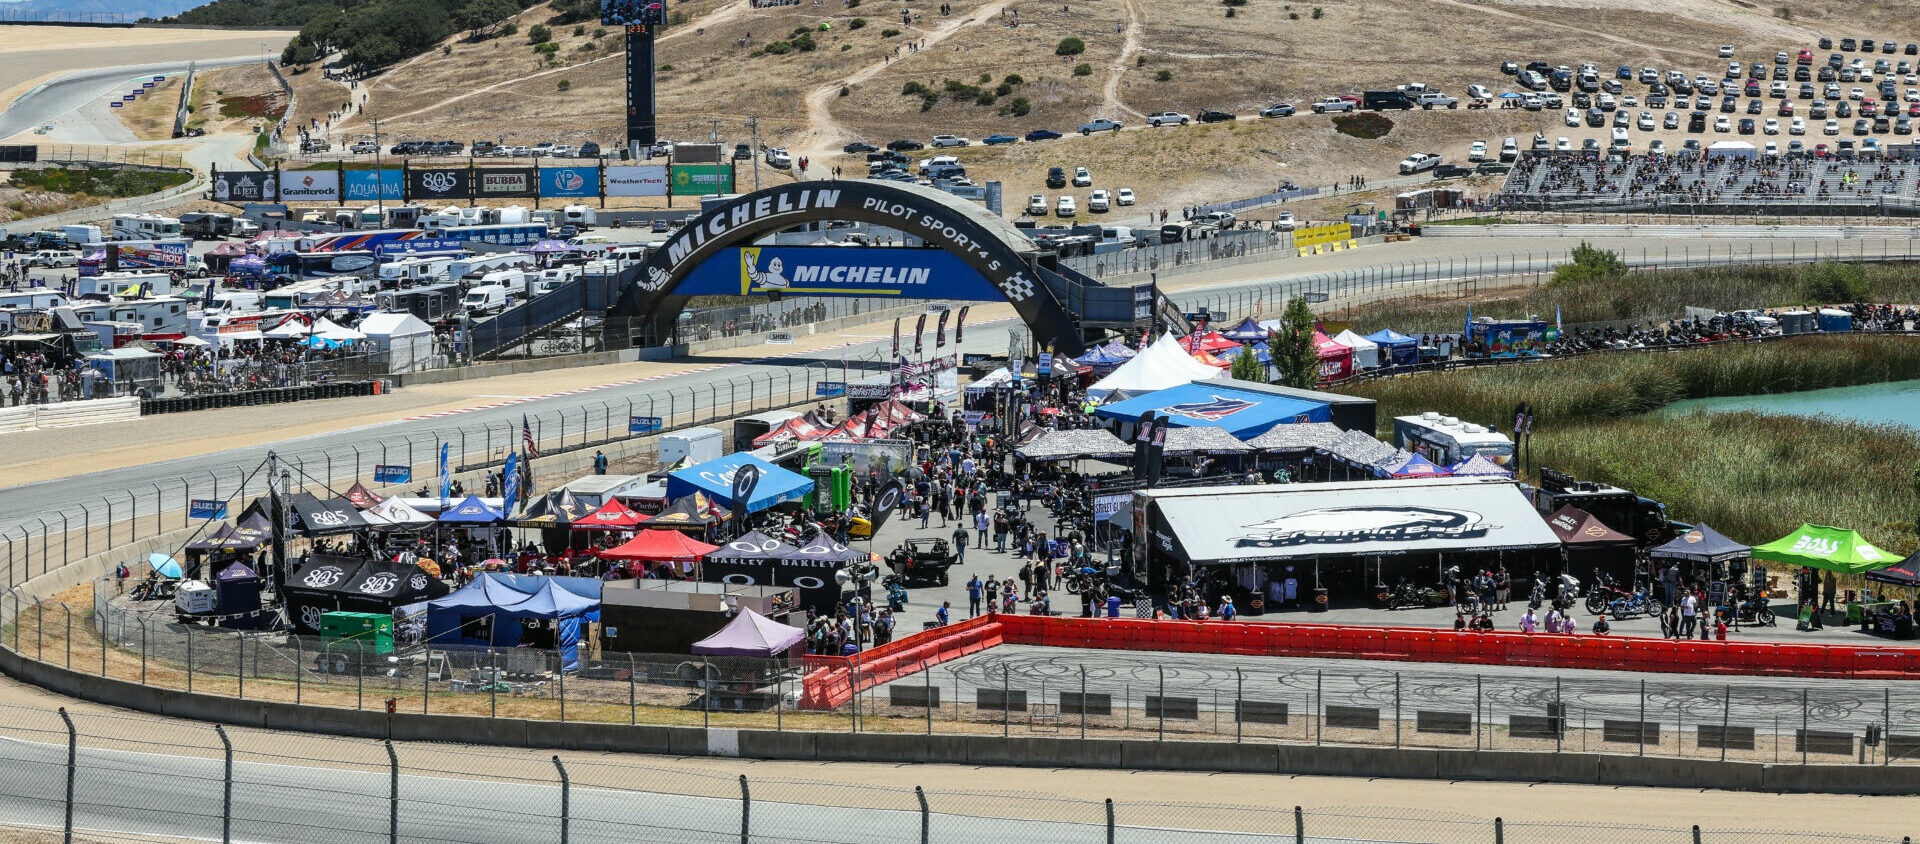 Spectator attendance for the MotoAmerica event at WeatherTech Raceway Laguna Seca was up year-over-year. Photo by Brian J. Nelson.